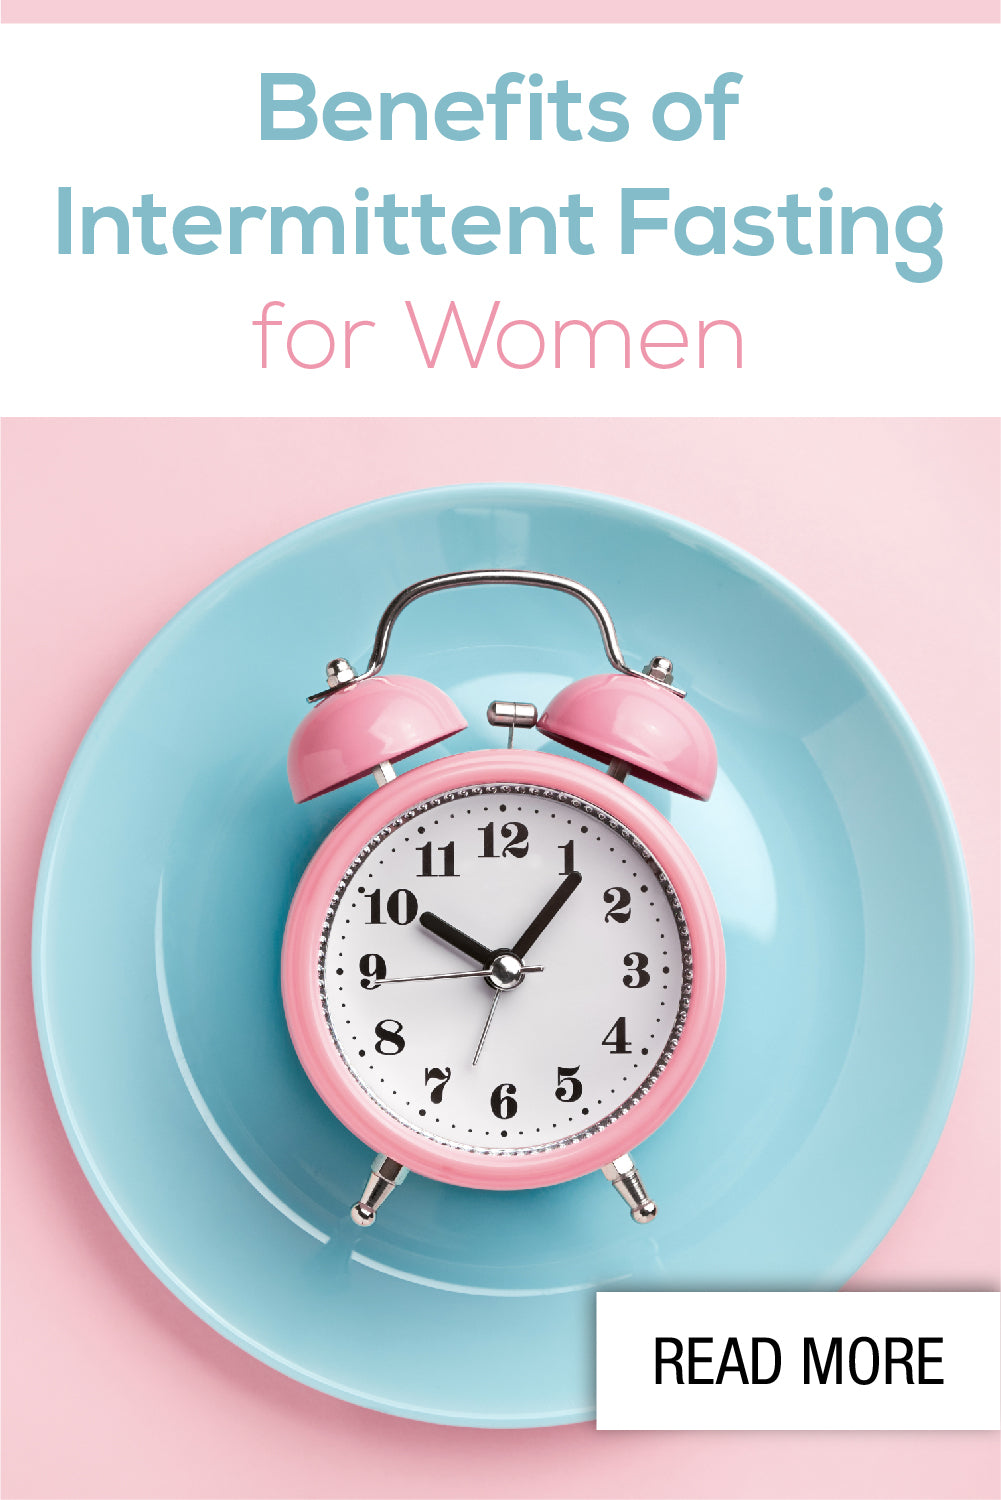 Benefits of Intermittent Fasting for Women